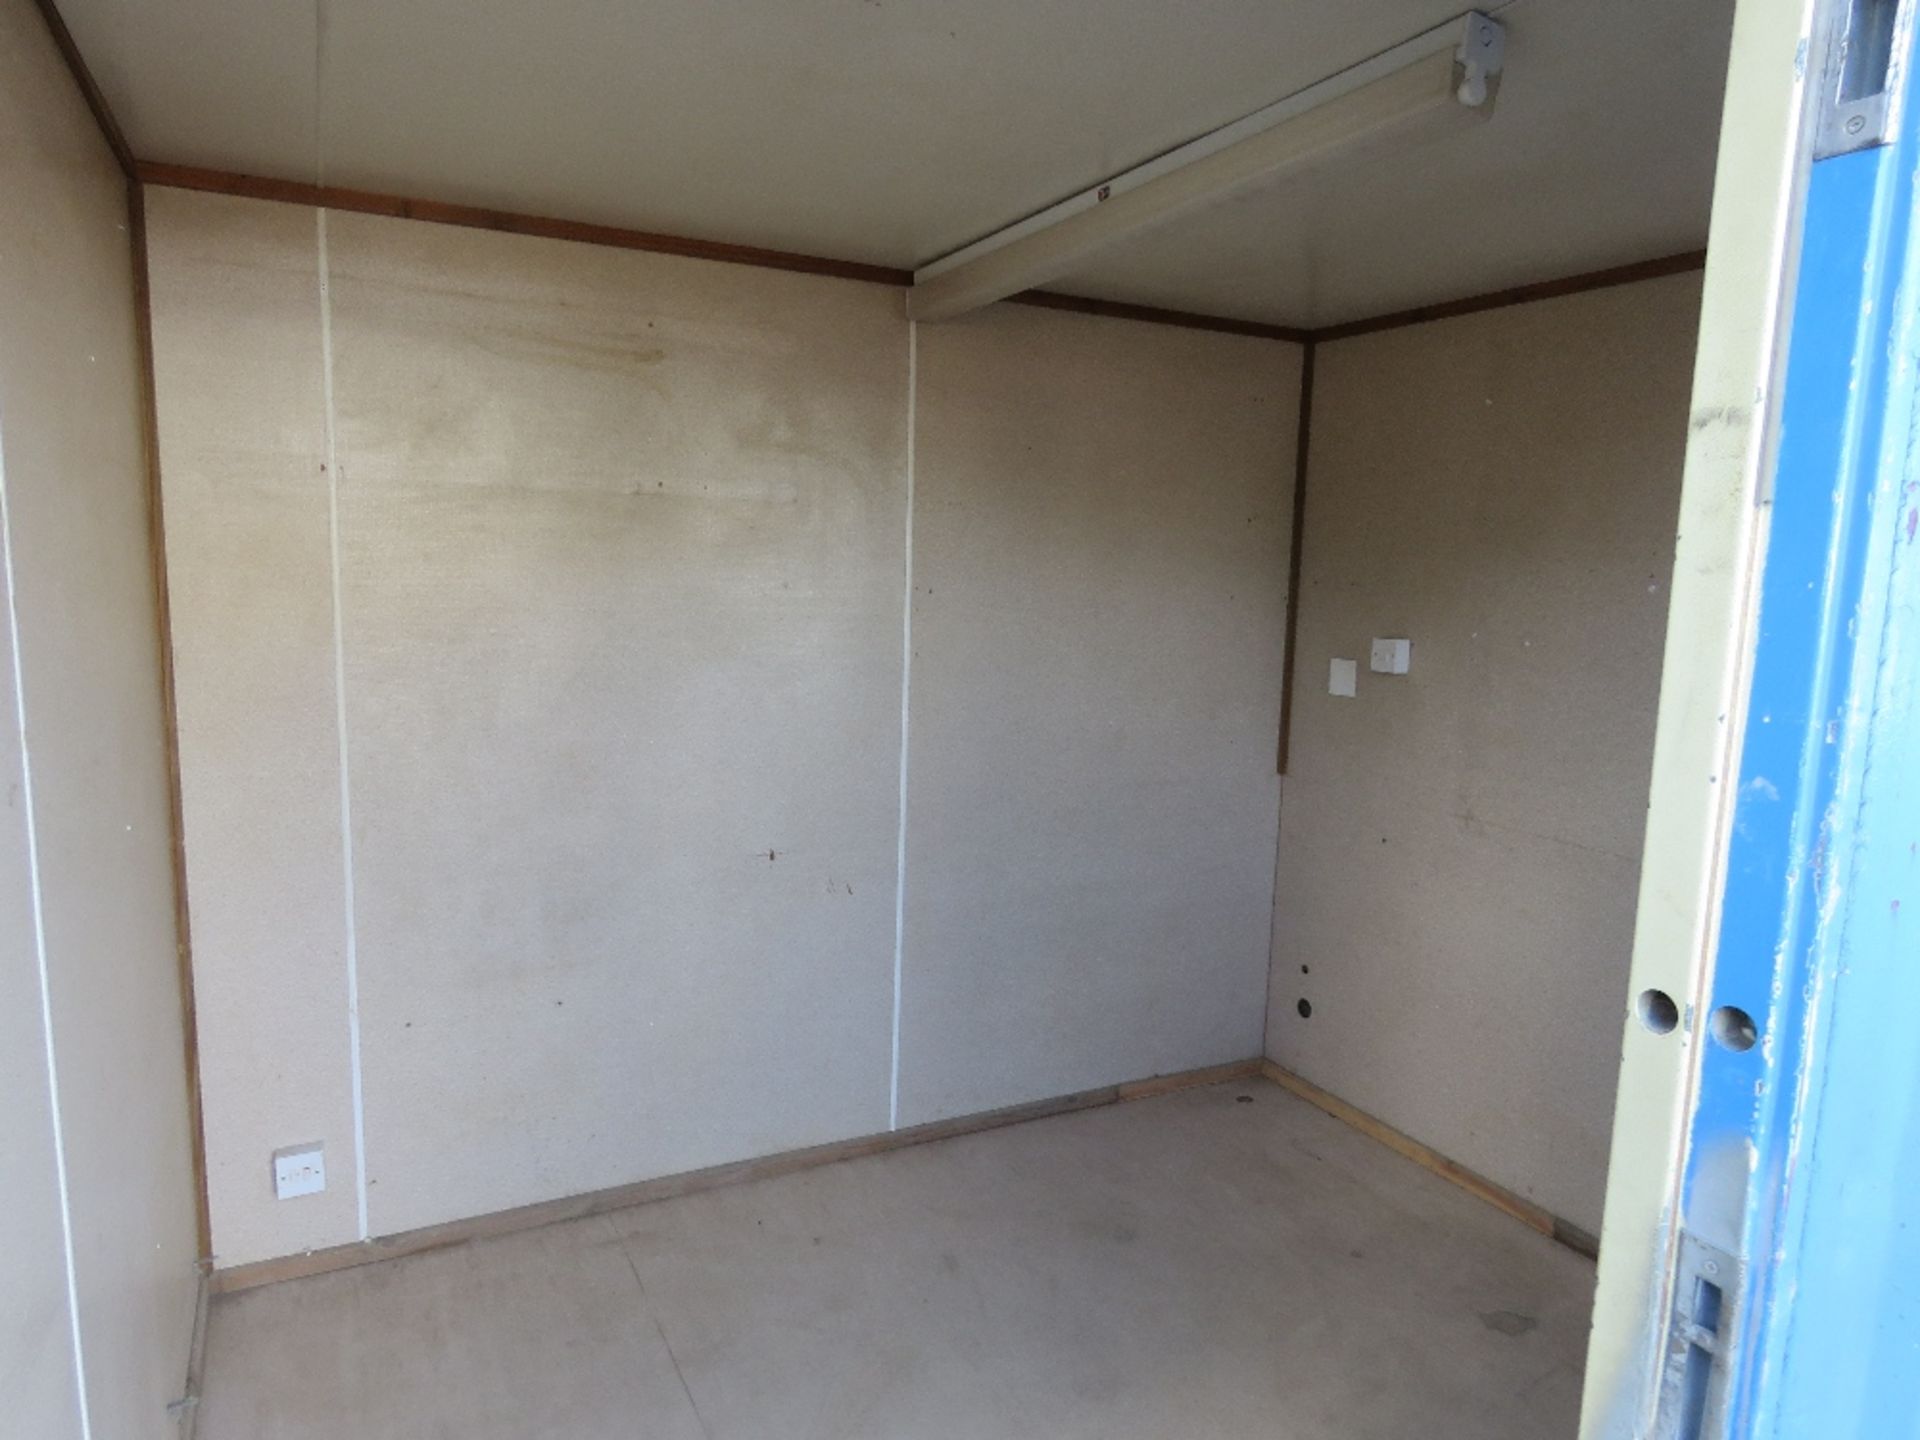 SECURE SITE OFFICE WITH KEY. 10FT X 8FT APPROX. SO11. - Image 3 of 3